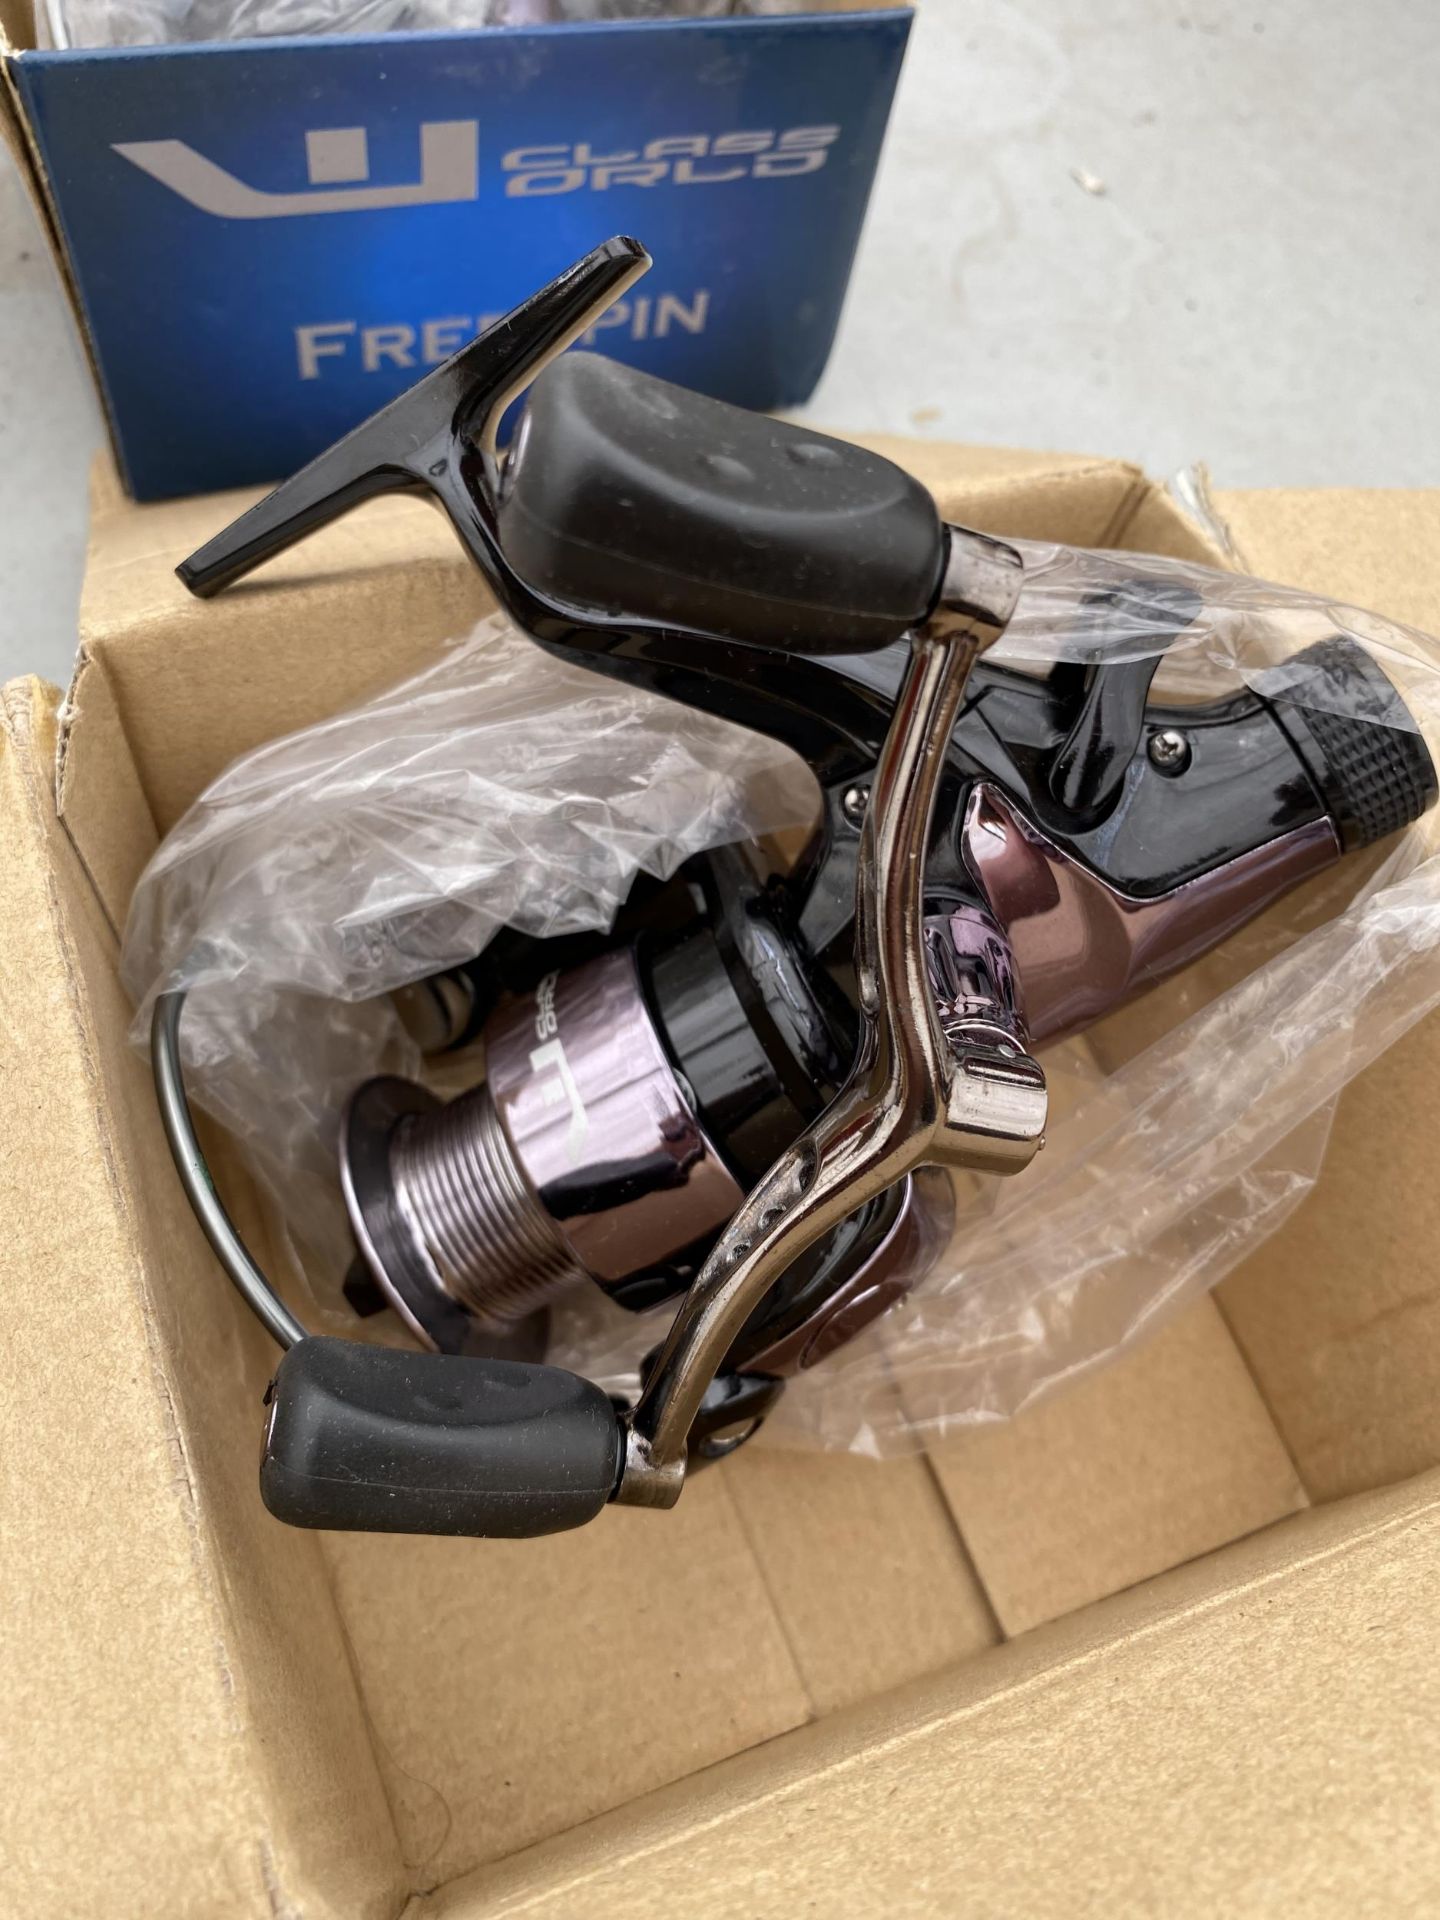 TWO BOXED FREESPIN FISHING REELS - Image 2 of 4